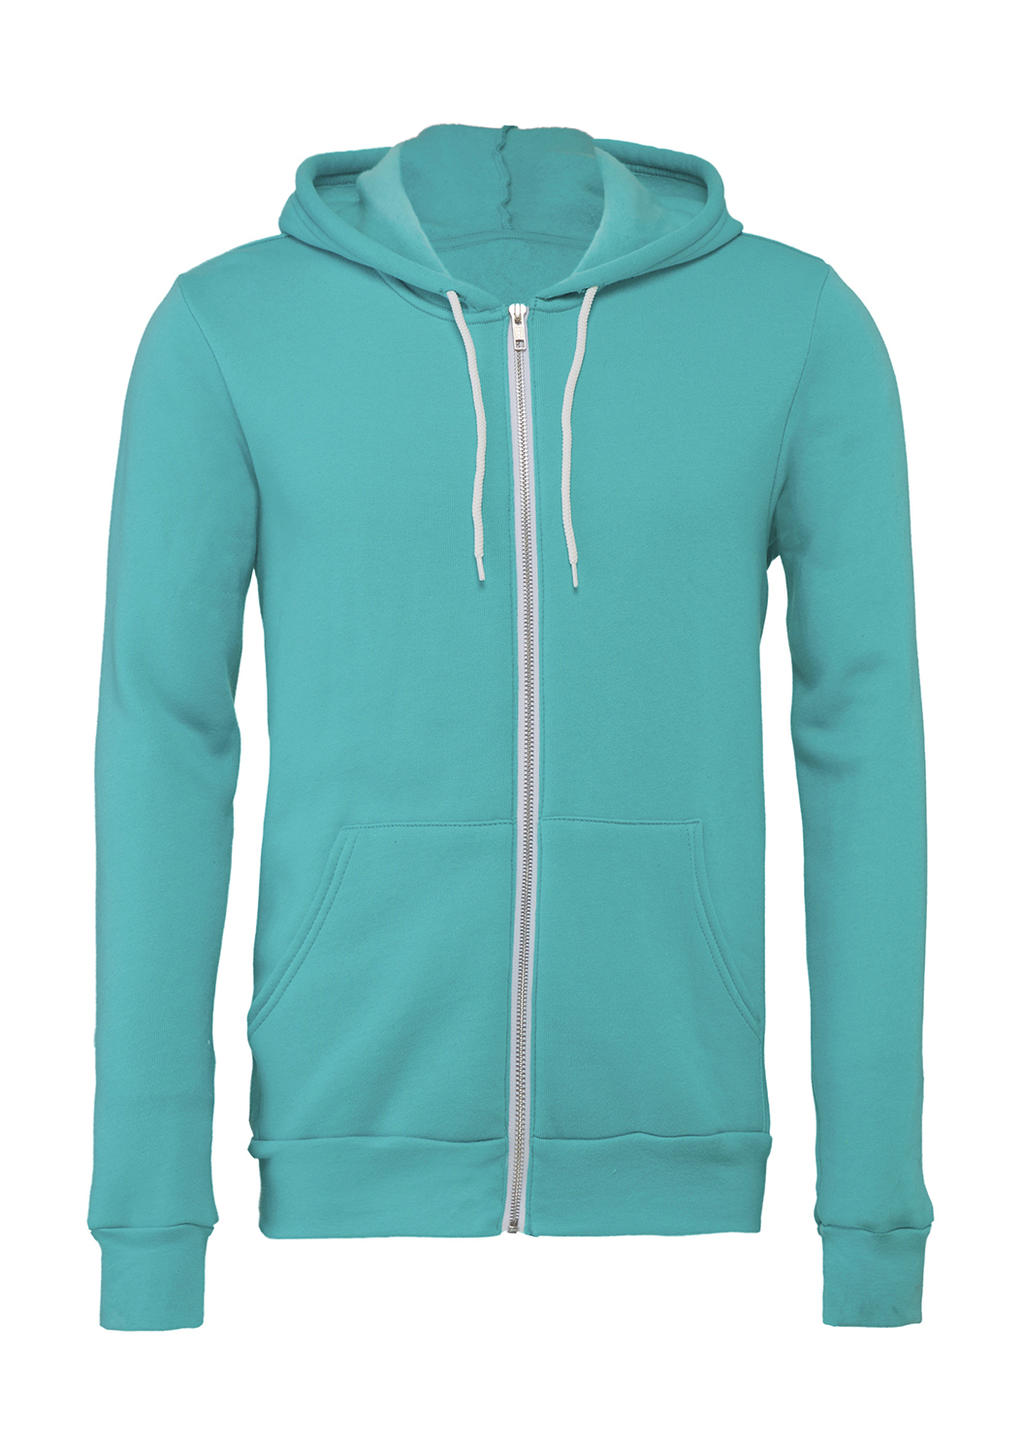  Unisex Poly-Cotton Full Zip Hoodie in Farbe Teal